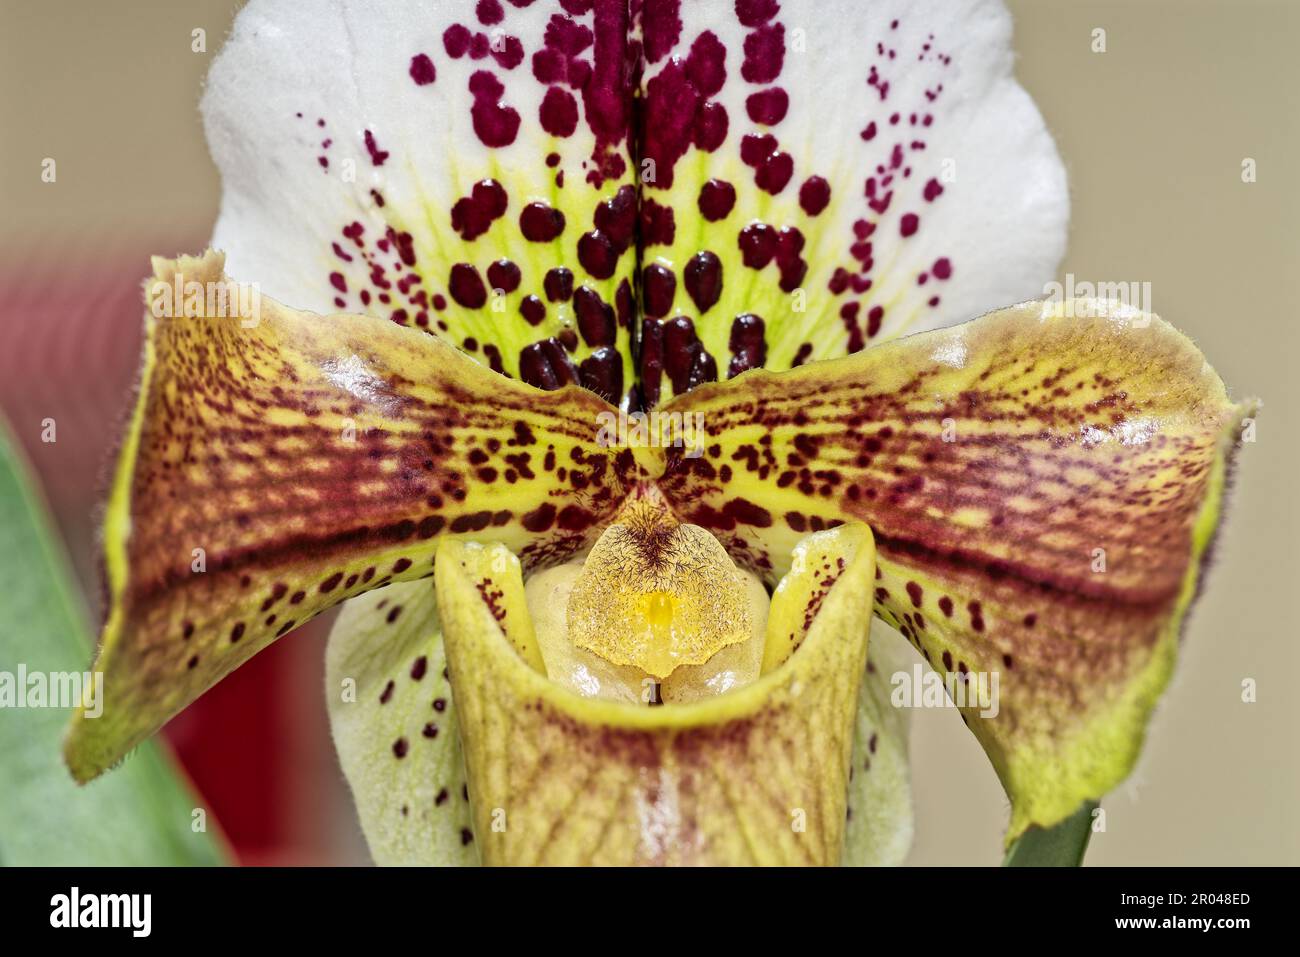 Close-up of an orchid flower Lady Slipper, Paphiopedilum. Macro shot Stock Photo